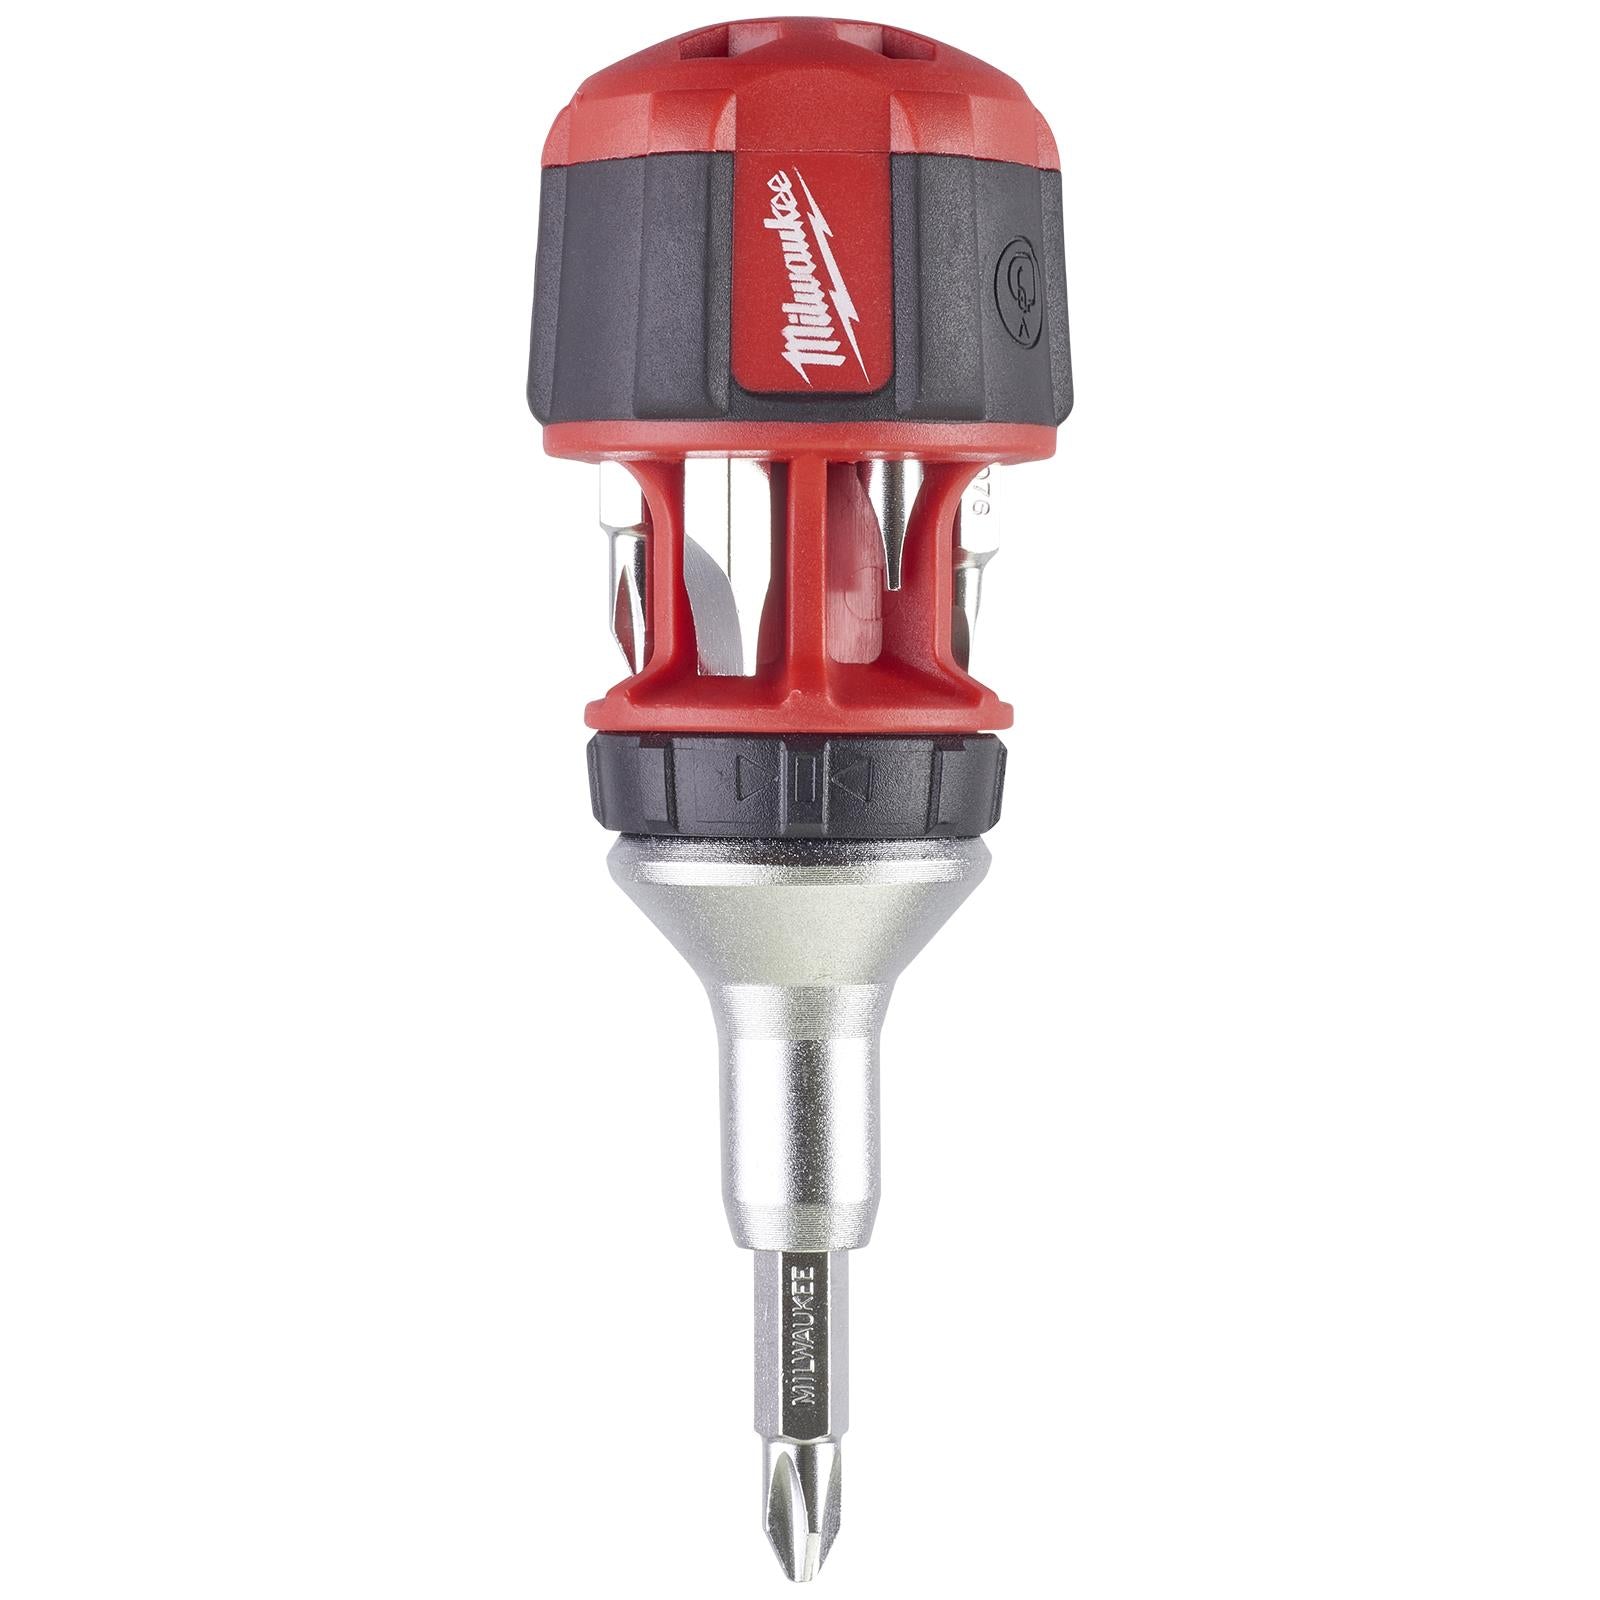 Milwaukee Compact Ratchet Screwdriver 8 in 1 Multi Bit Phillips Pozi Torx Slotted